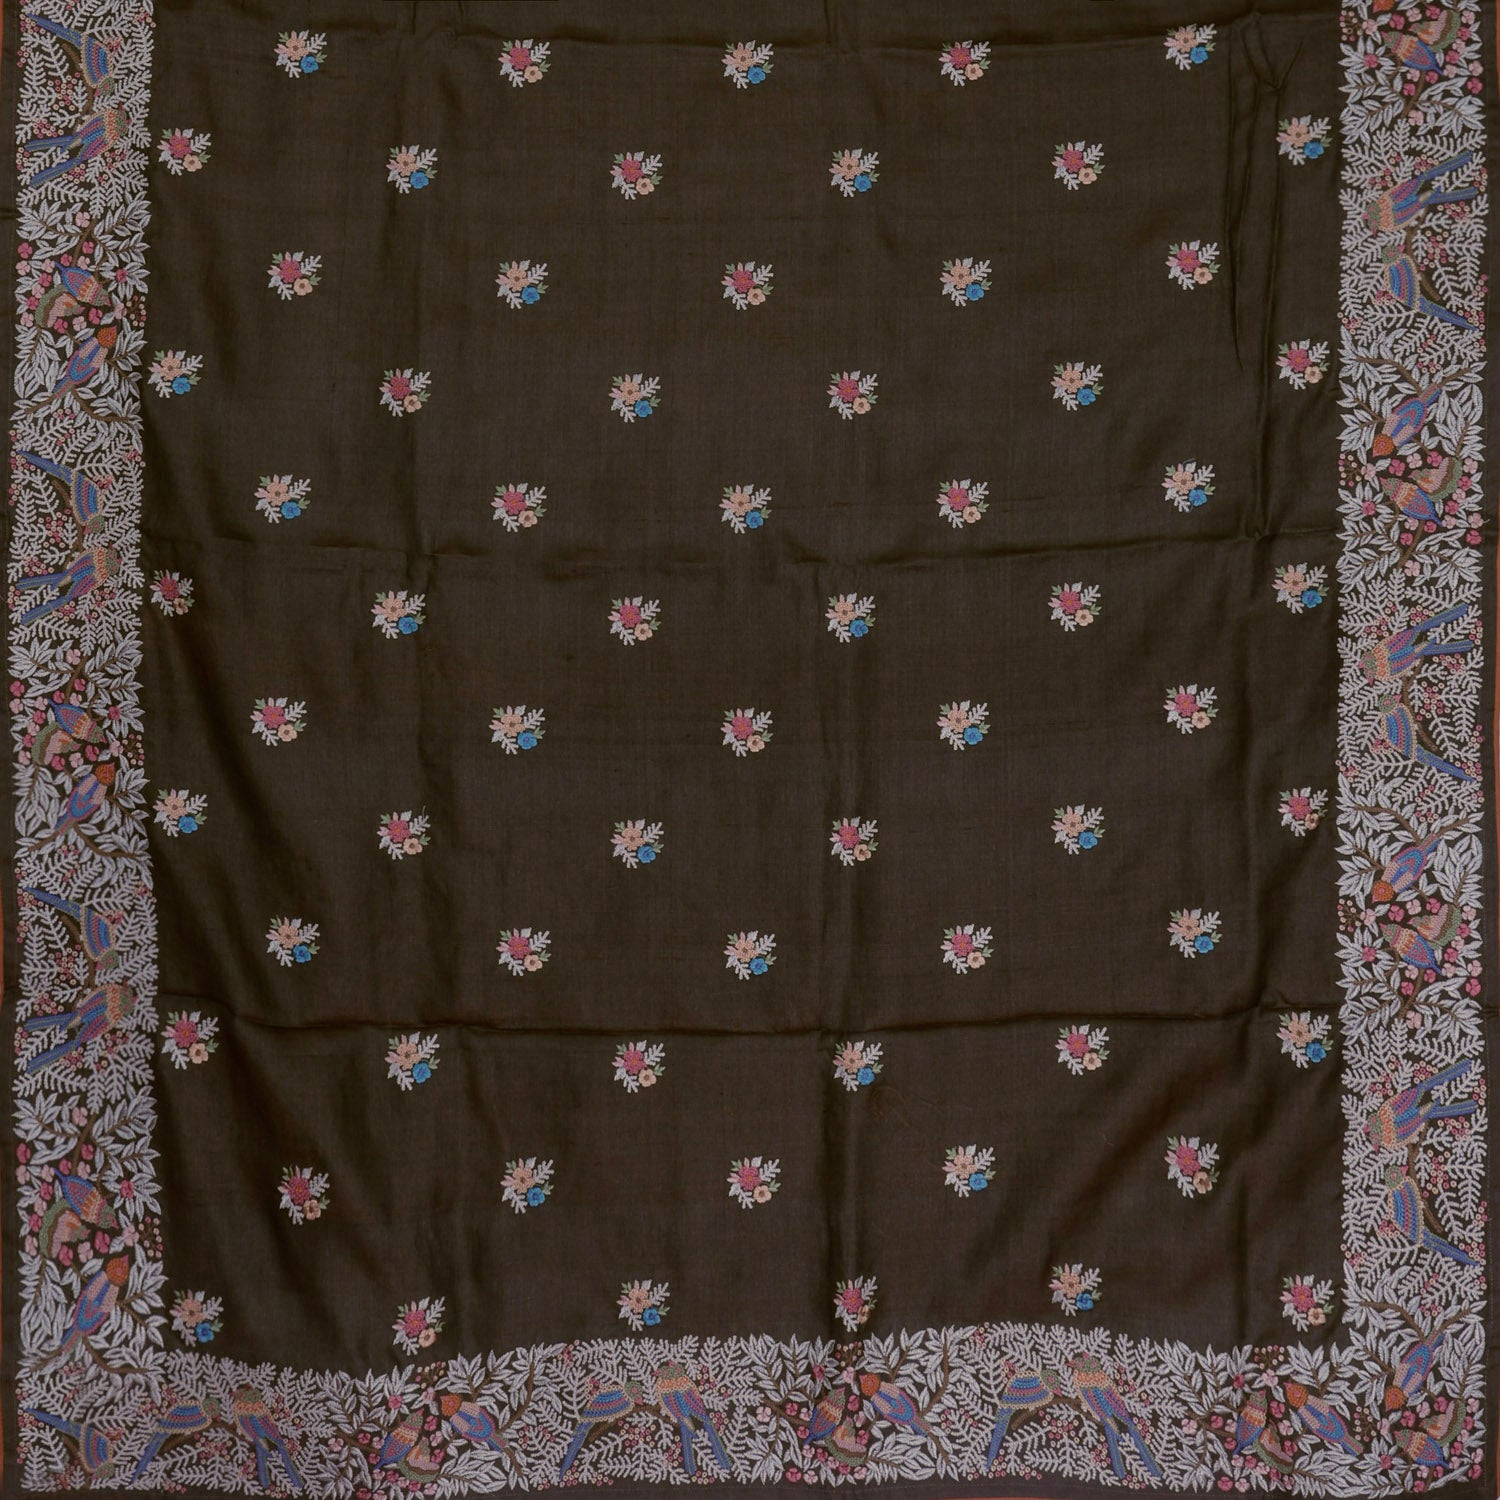 Dark Brown Tussar Saree With Floral Embroidered Pattern And Buttas - Singhania's